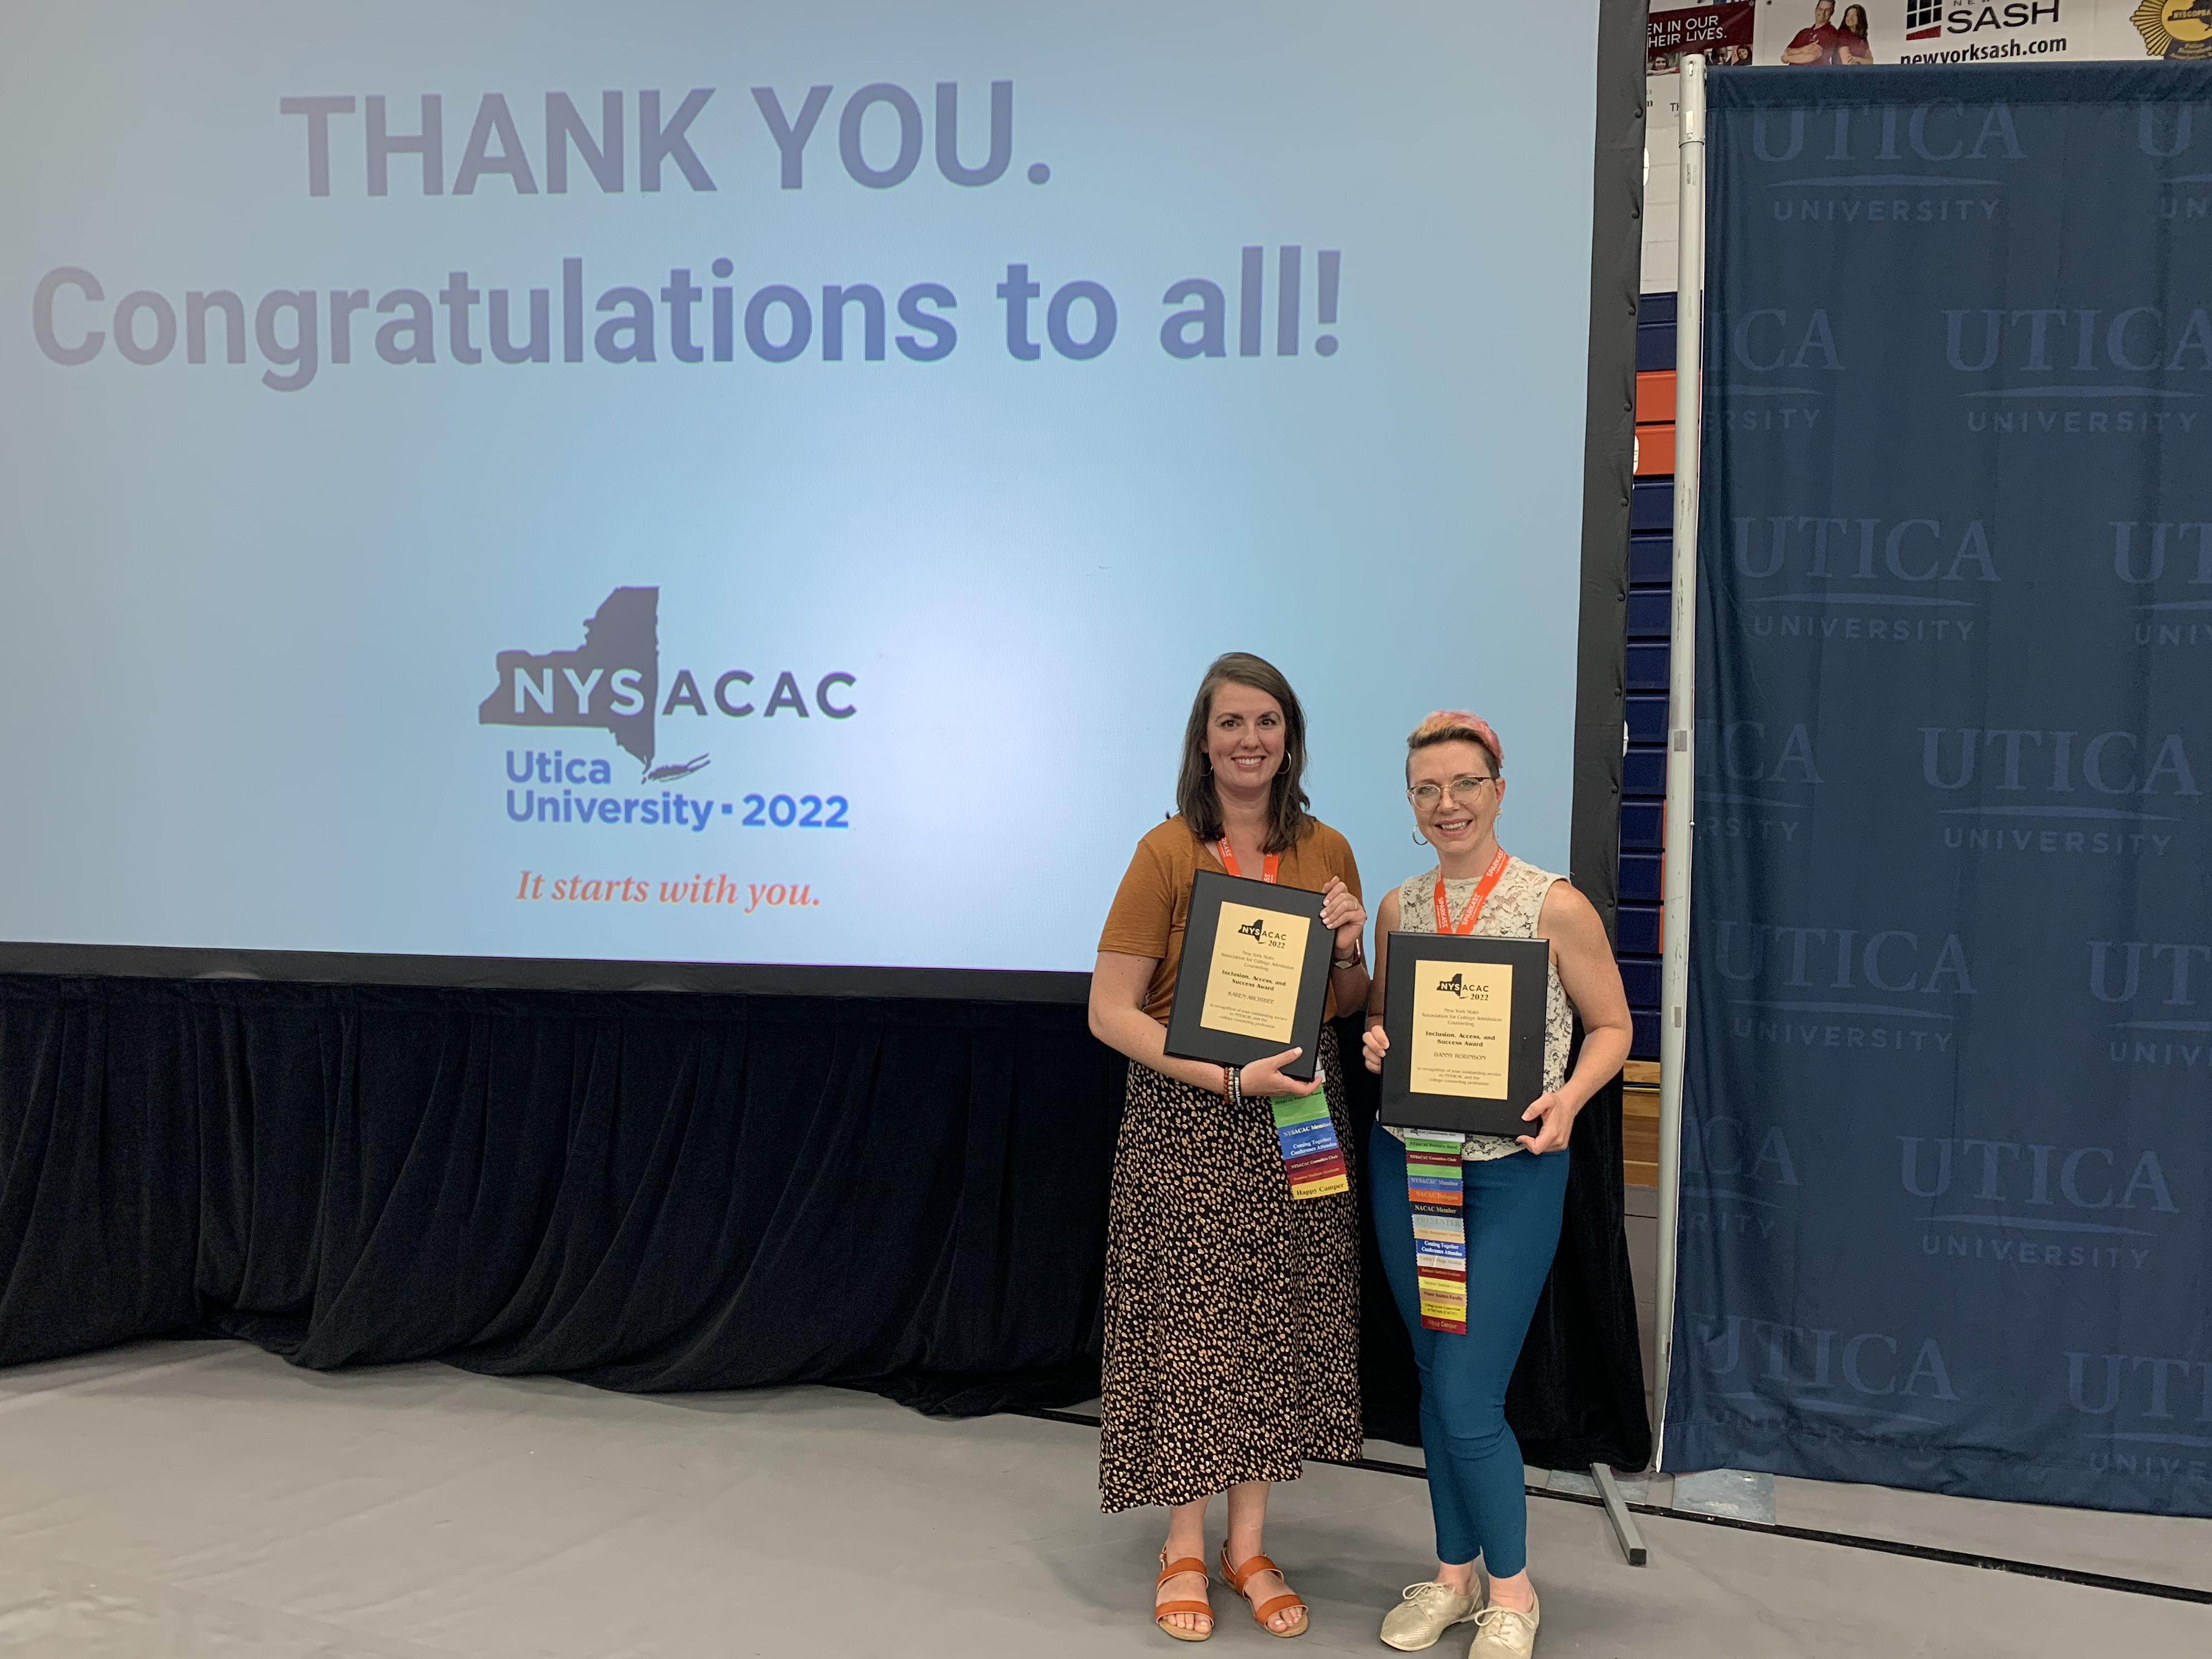 SUNY Oswego's Karen Archibee and Danny Robinson of SUNY Maritime earned a statewide award for their support of access and inclusion in admissions activities